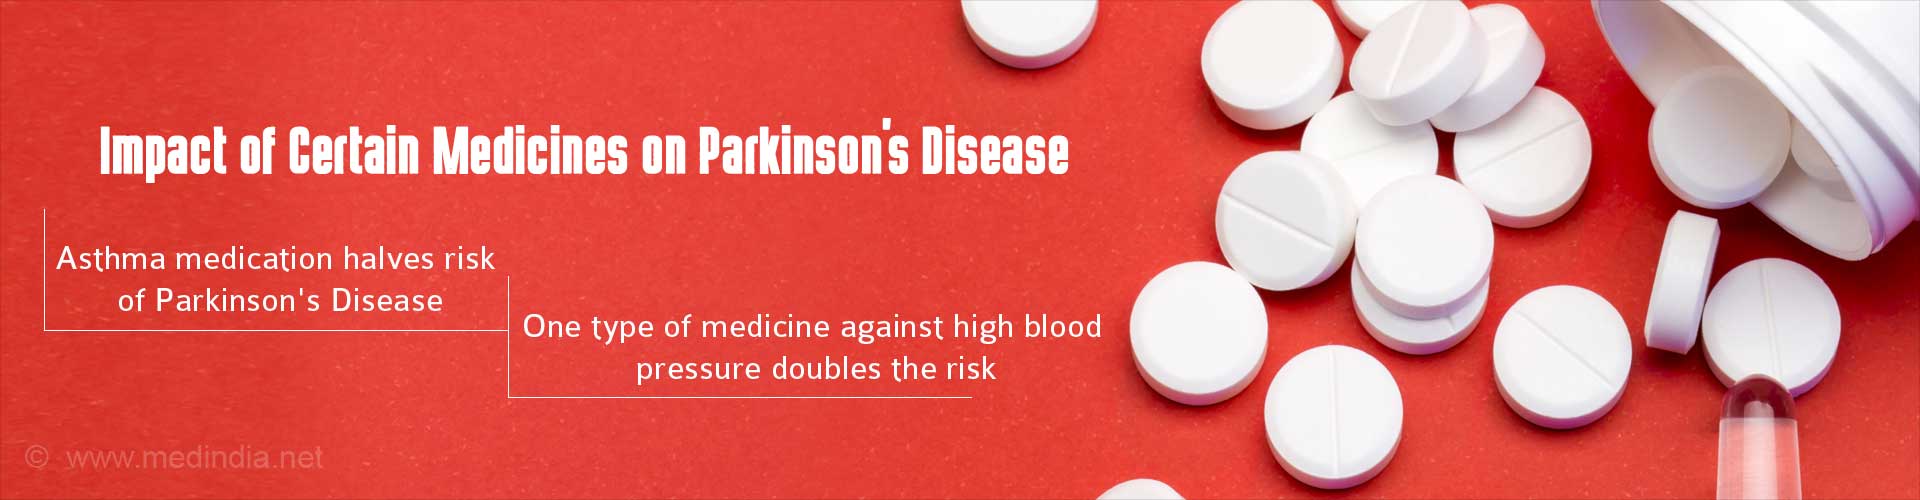 Impact of certain medicines on Parkinson's Disease
- Asthma medication halves risk of Parkinson's Disease
- One type of medicine against high blood pressure double the risk